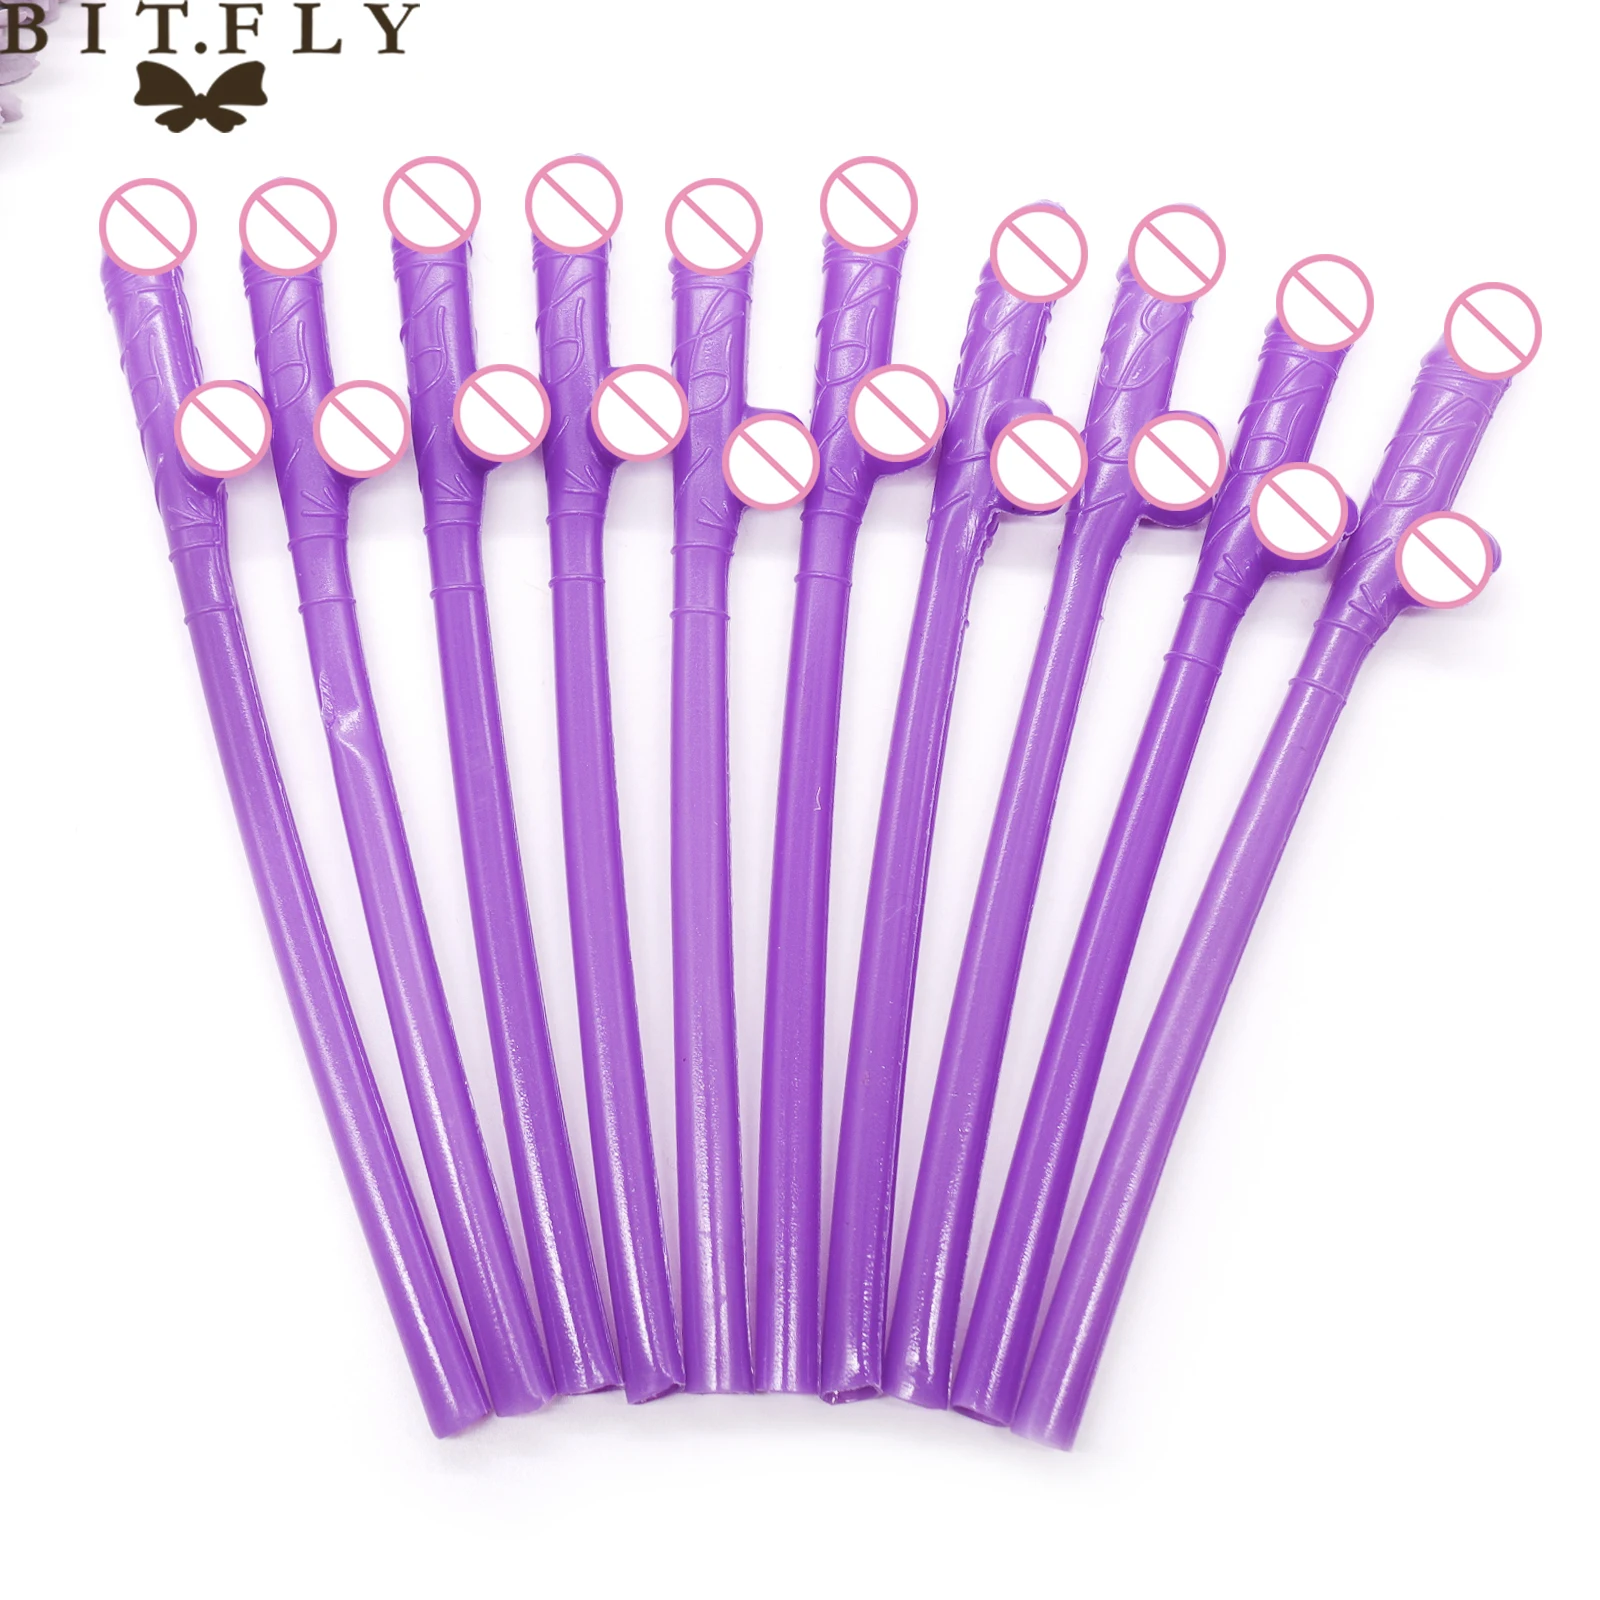 1x Huge willy straw hen night party girls night out bachelorette bridal plas Fz 